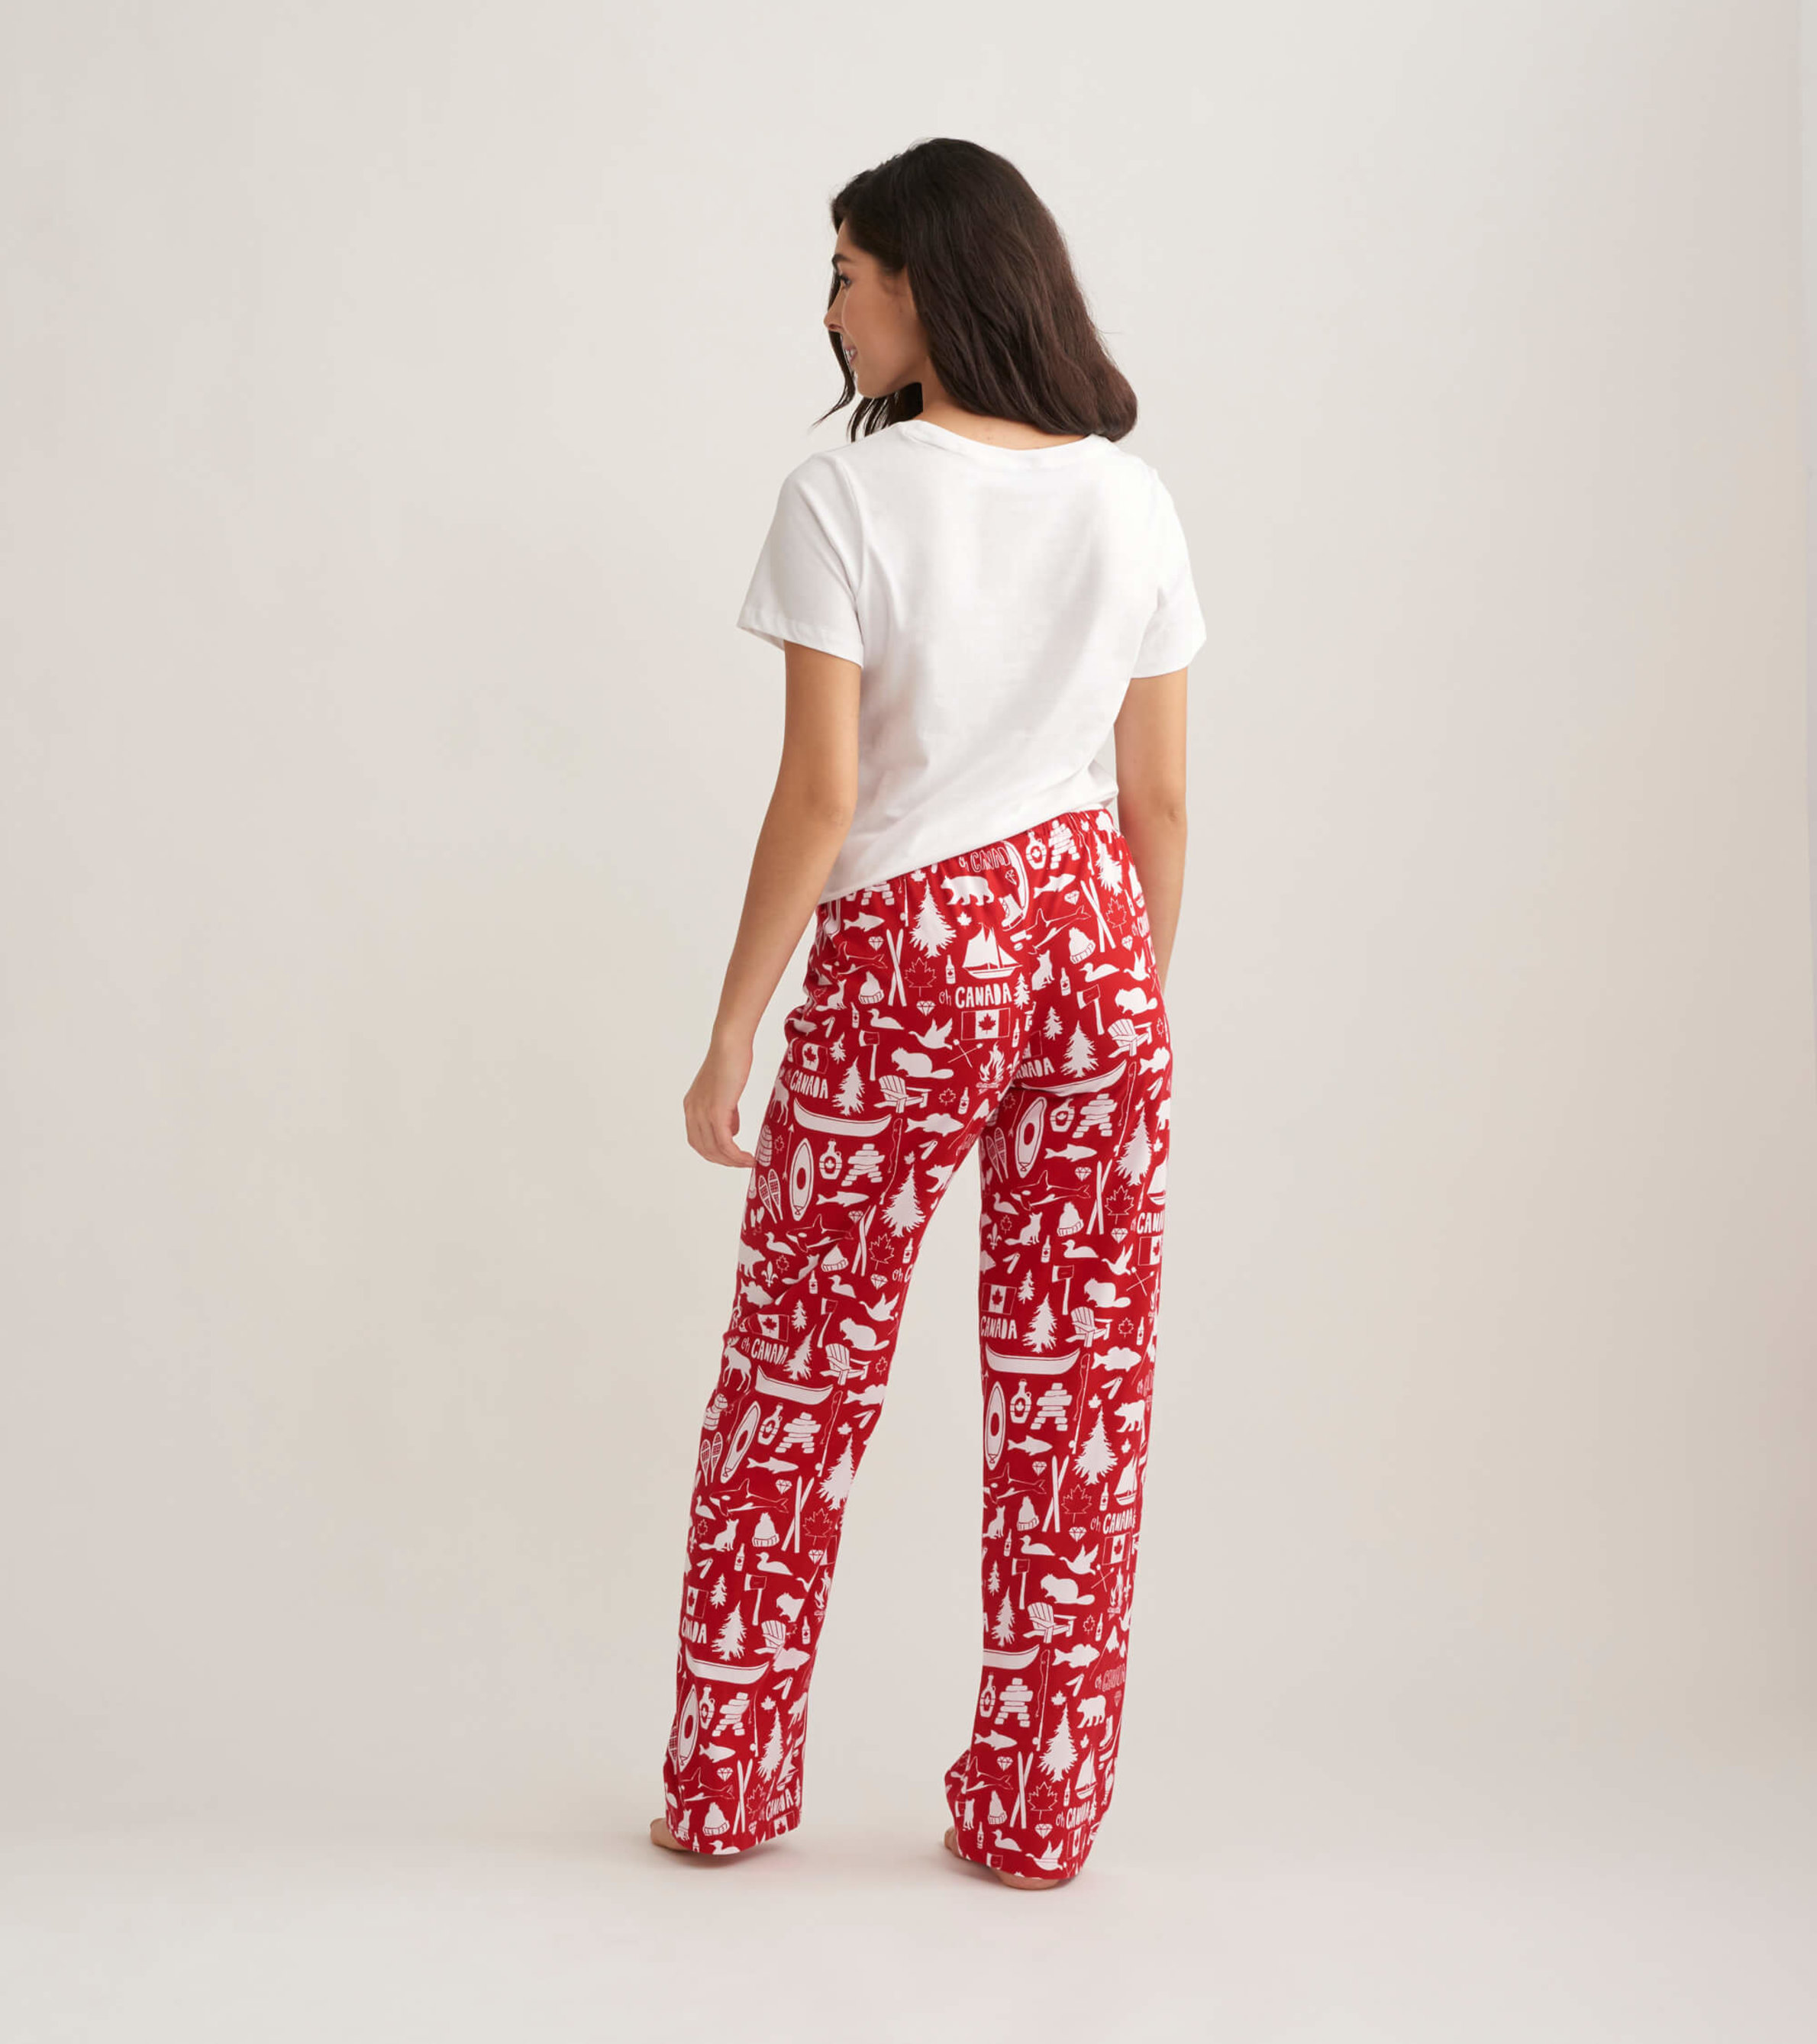 https://cdn.littlebluehouse.com/product_images/oh-canada-womens-tee-and-pants-pajama-set/GPF20LL025_A_jpg/pdp_zoom.jpg?c=1603989854&locale=en